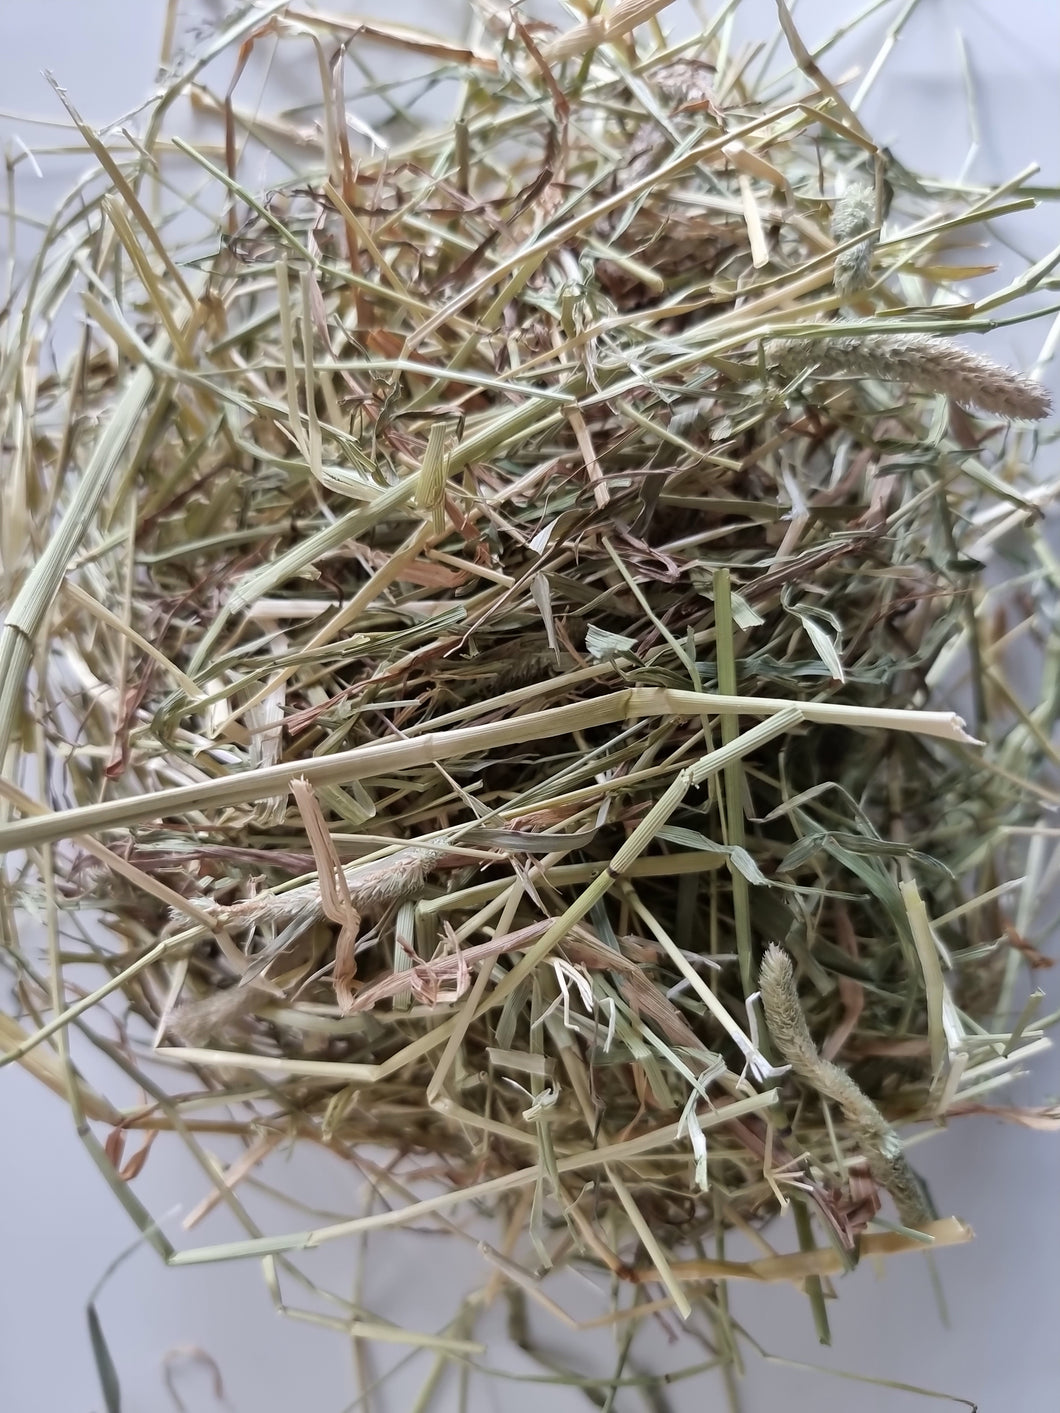 Wild About Bunnies Hay Samples